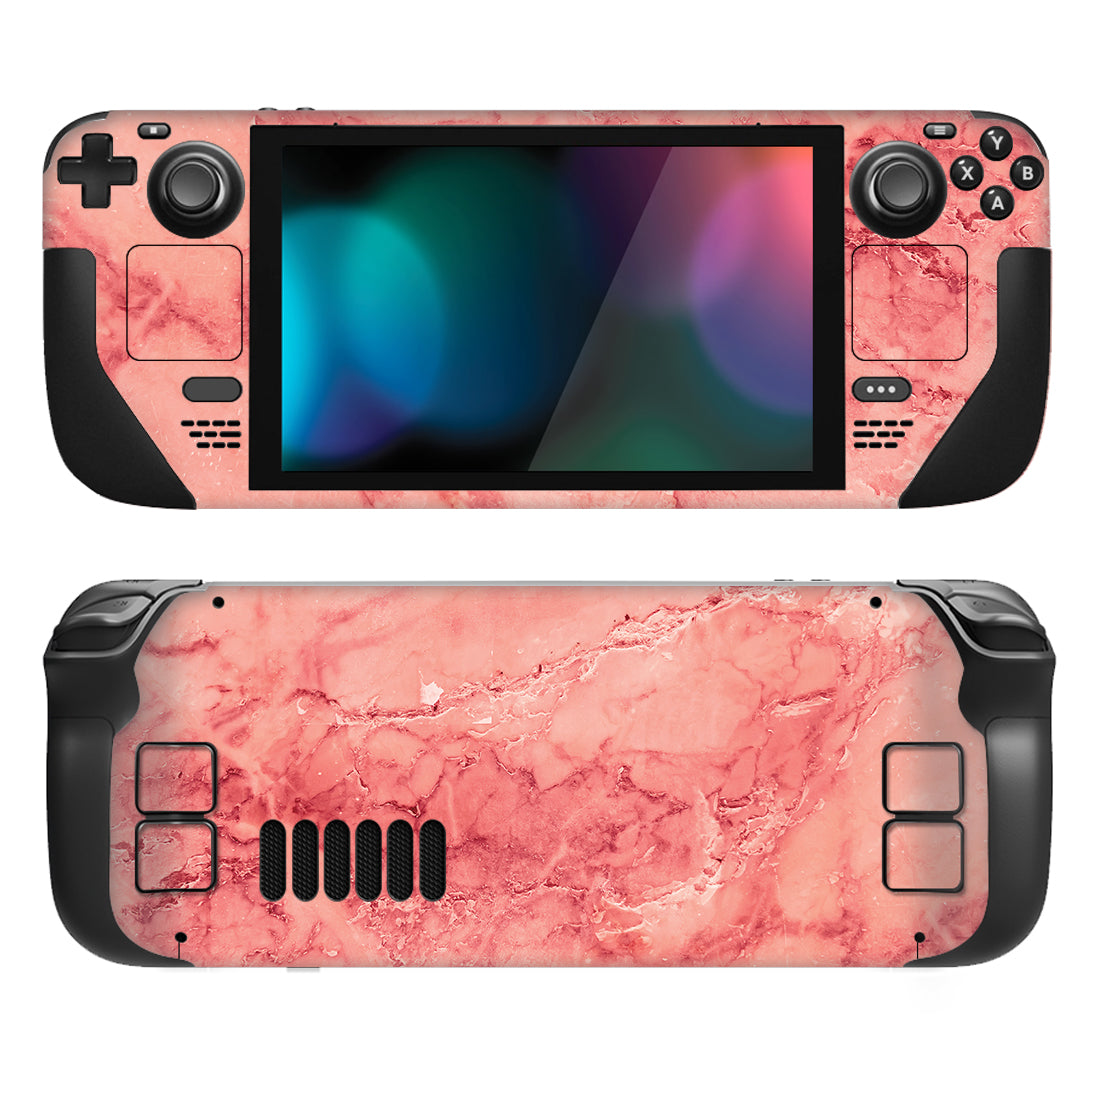 PlayVital Full Set Protective Skin Decal for Steam Deck, Custom Stickers Vinyl Cover for Steam Deck Handheld Gaming PC - Pastel Red Marble - SDTM033 playvital